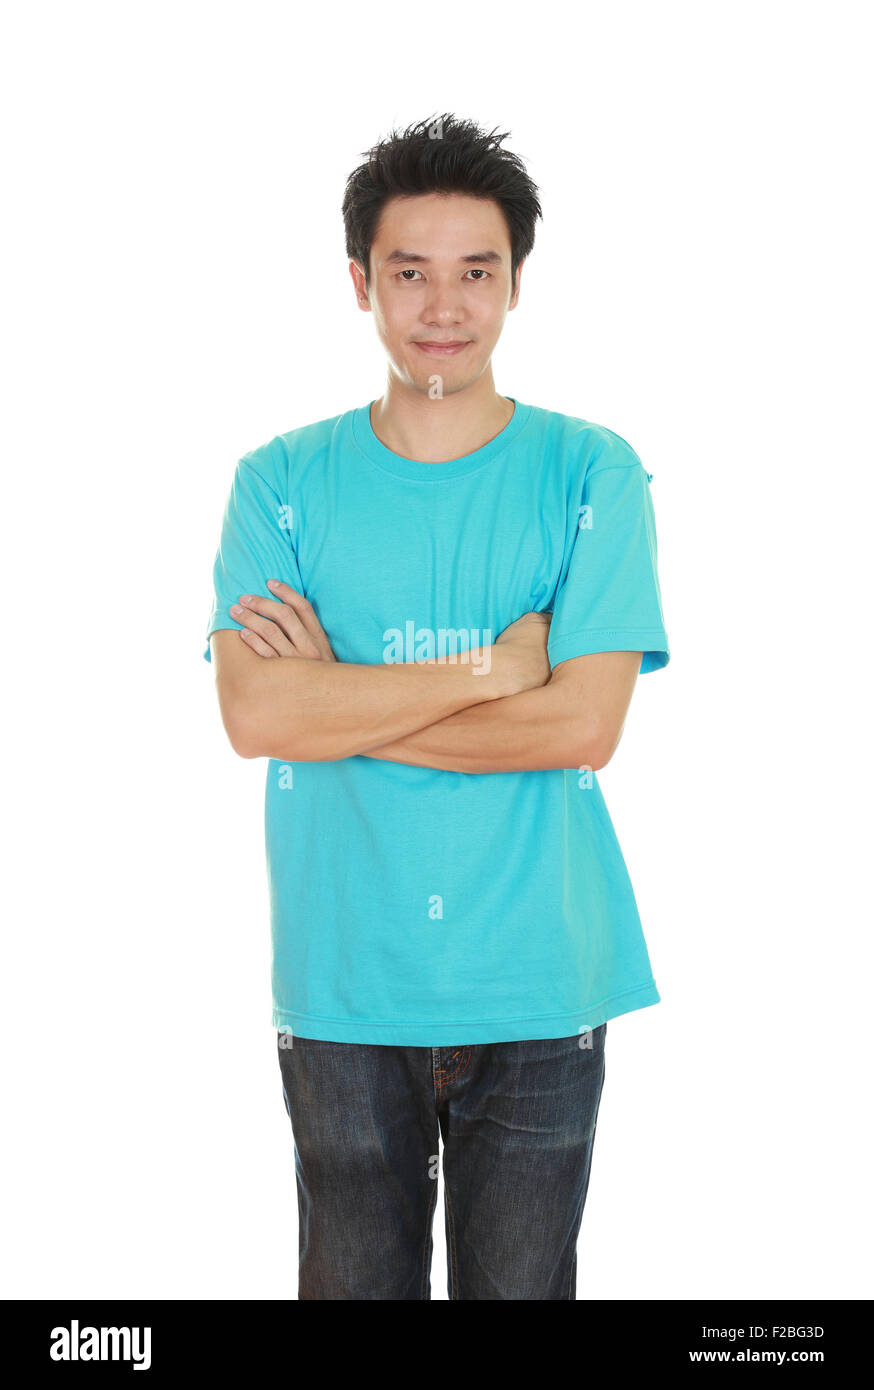 man with arms crossed, wearing green t-shirt isolated on white background. Stock Photo